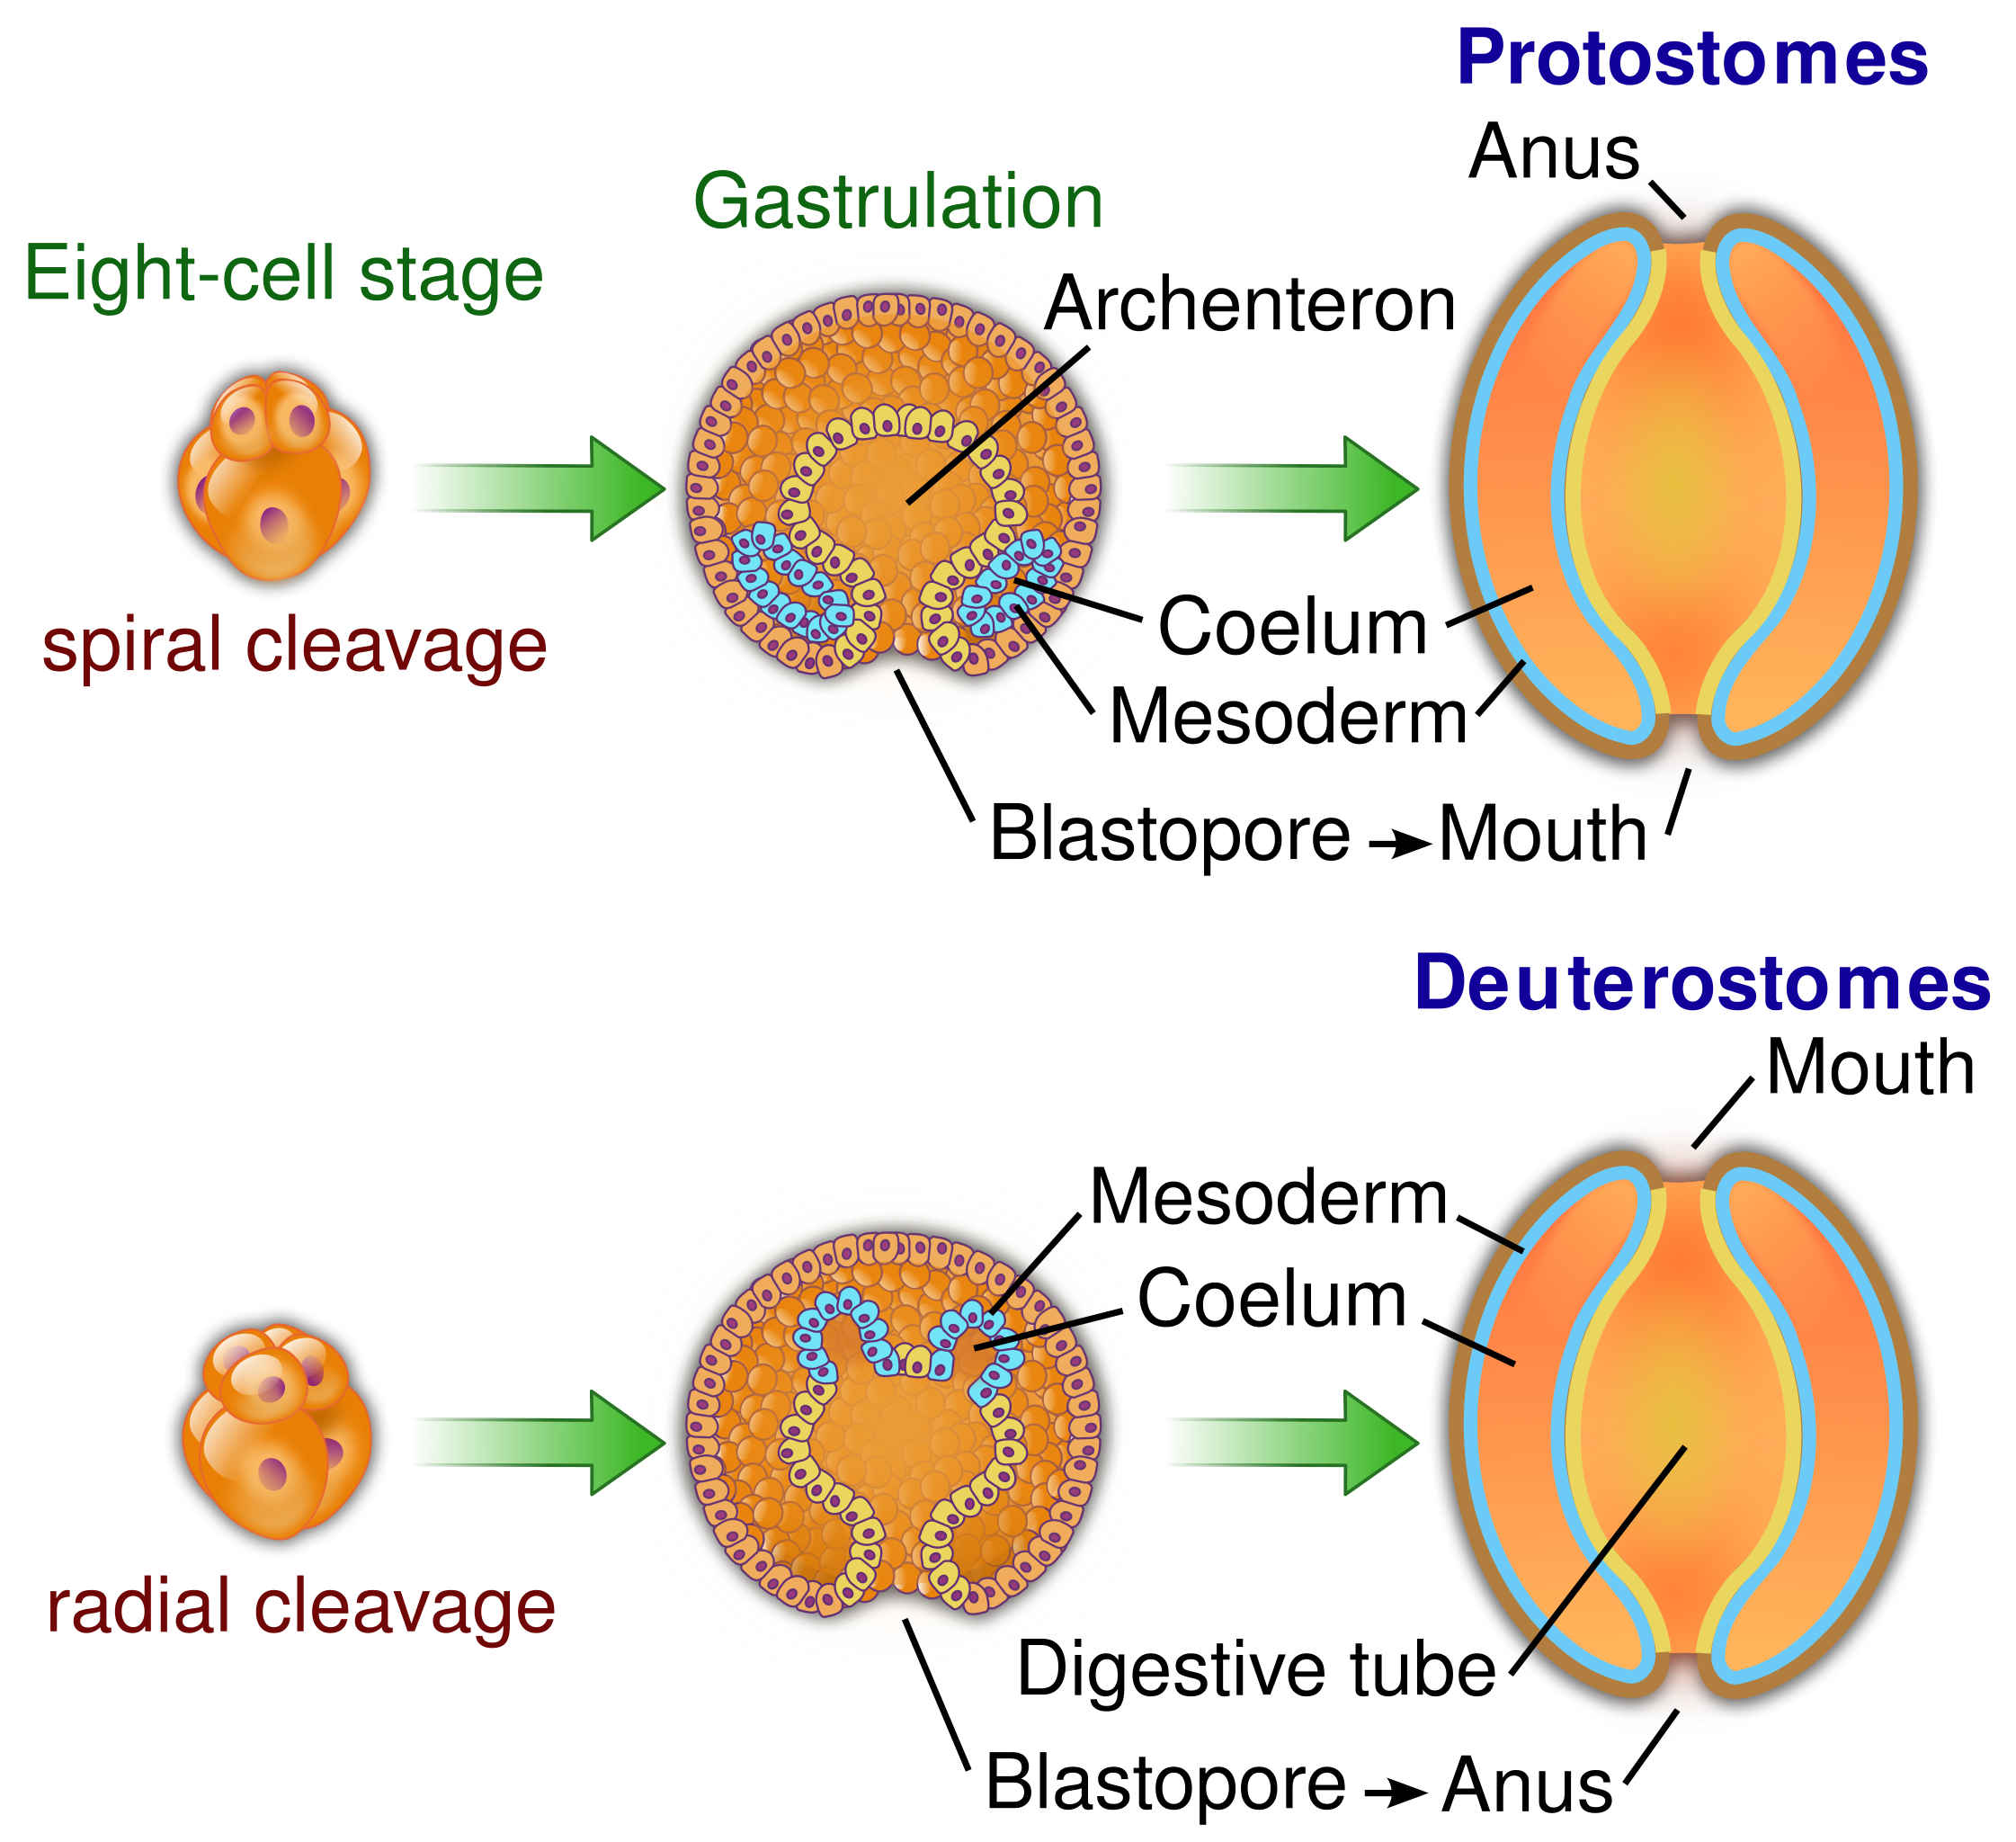 The illustration shows early development of protostomes versus deuterostomes.